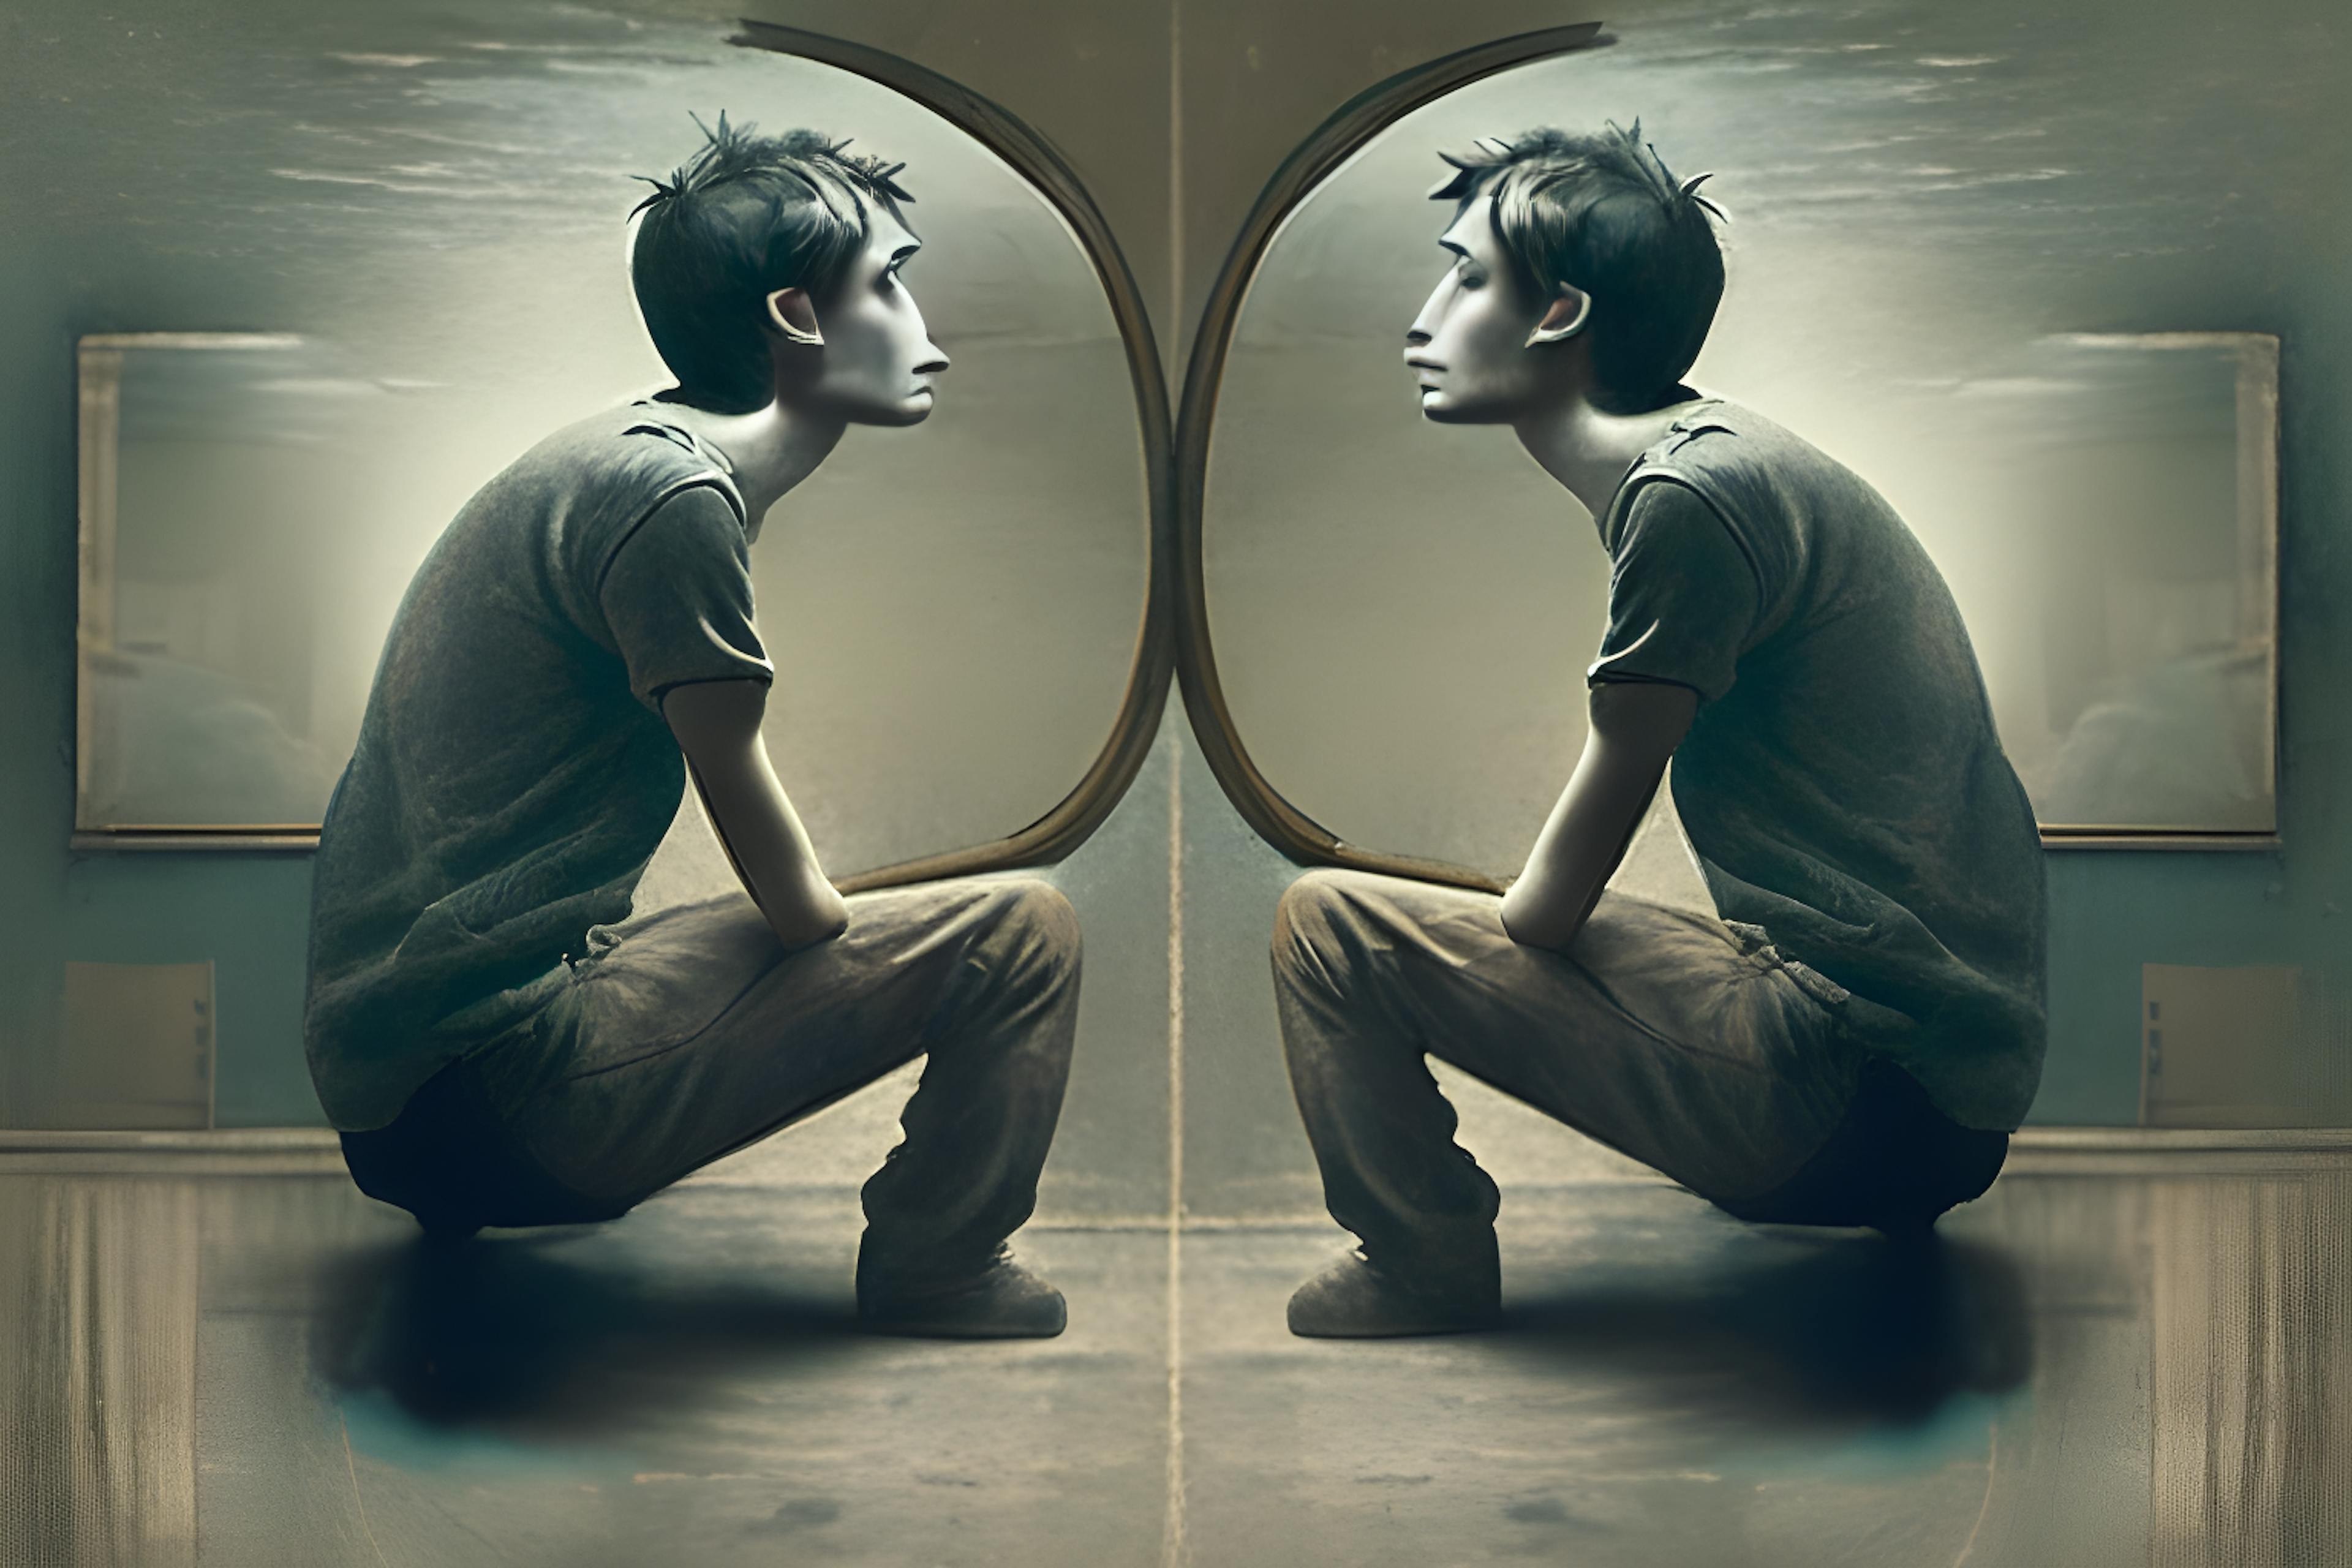 featured image - Talking to Yourself Does NOT Mean You're "Crazy" (!); In Fact, It Can Be Very Helpful